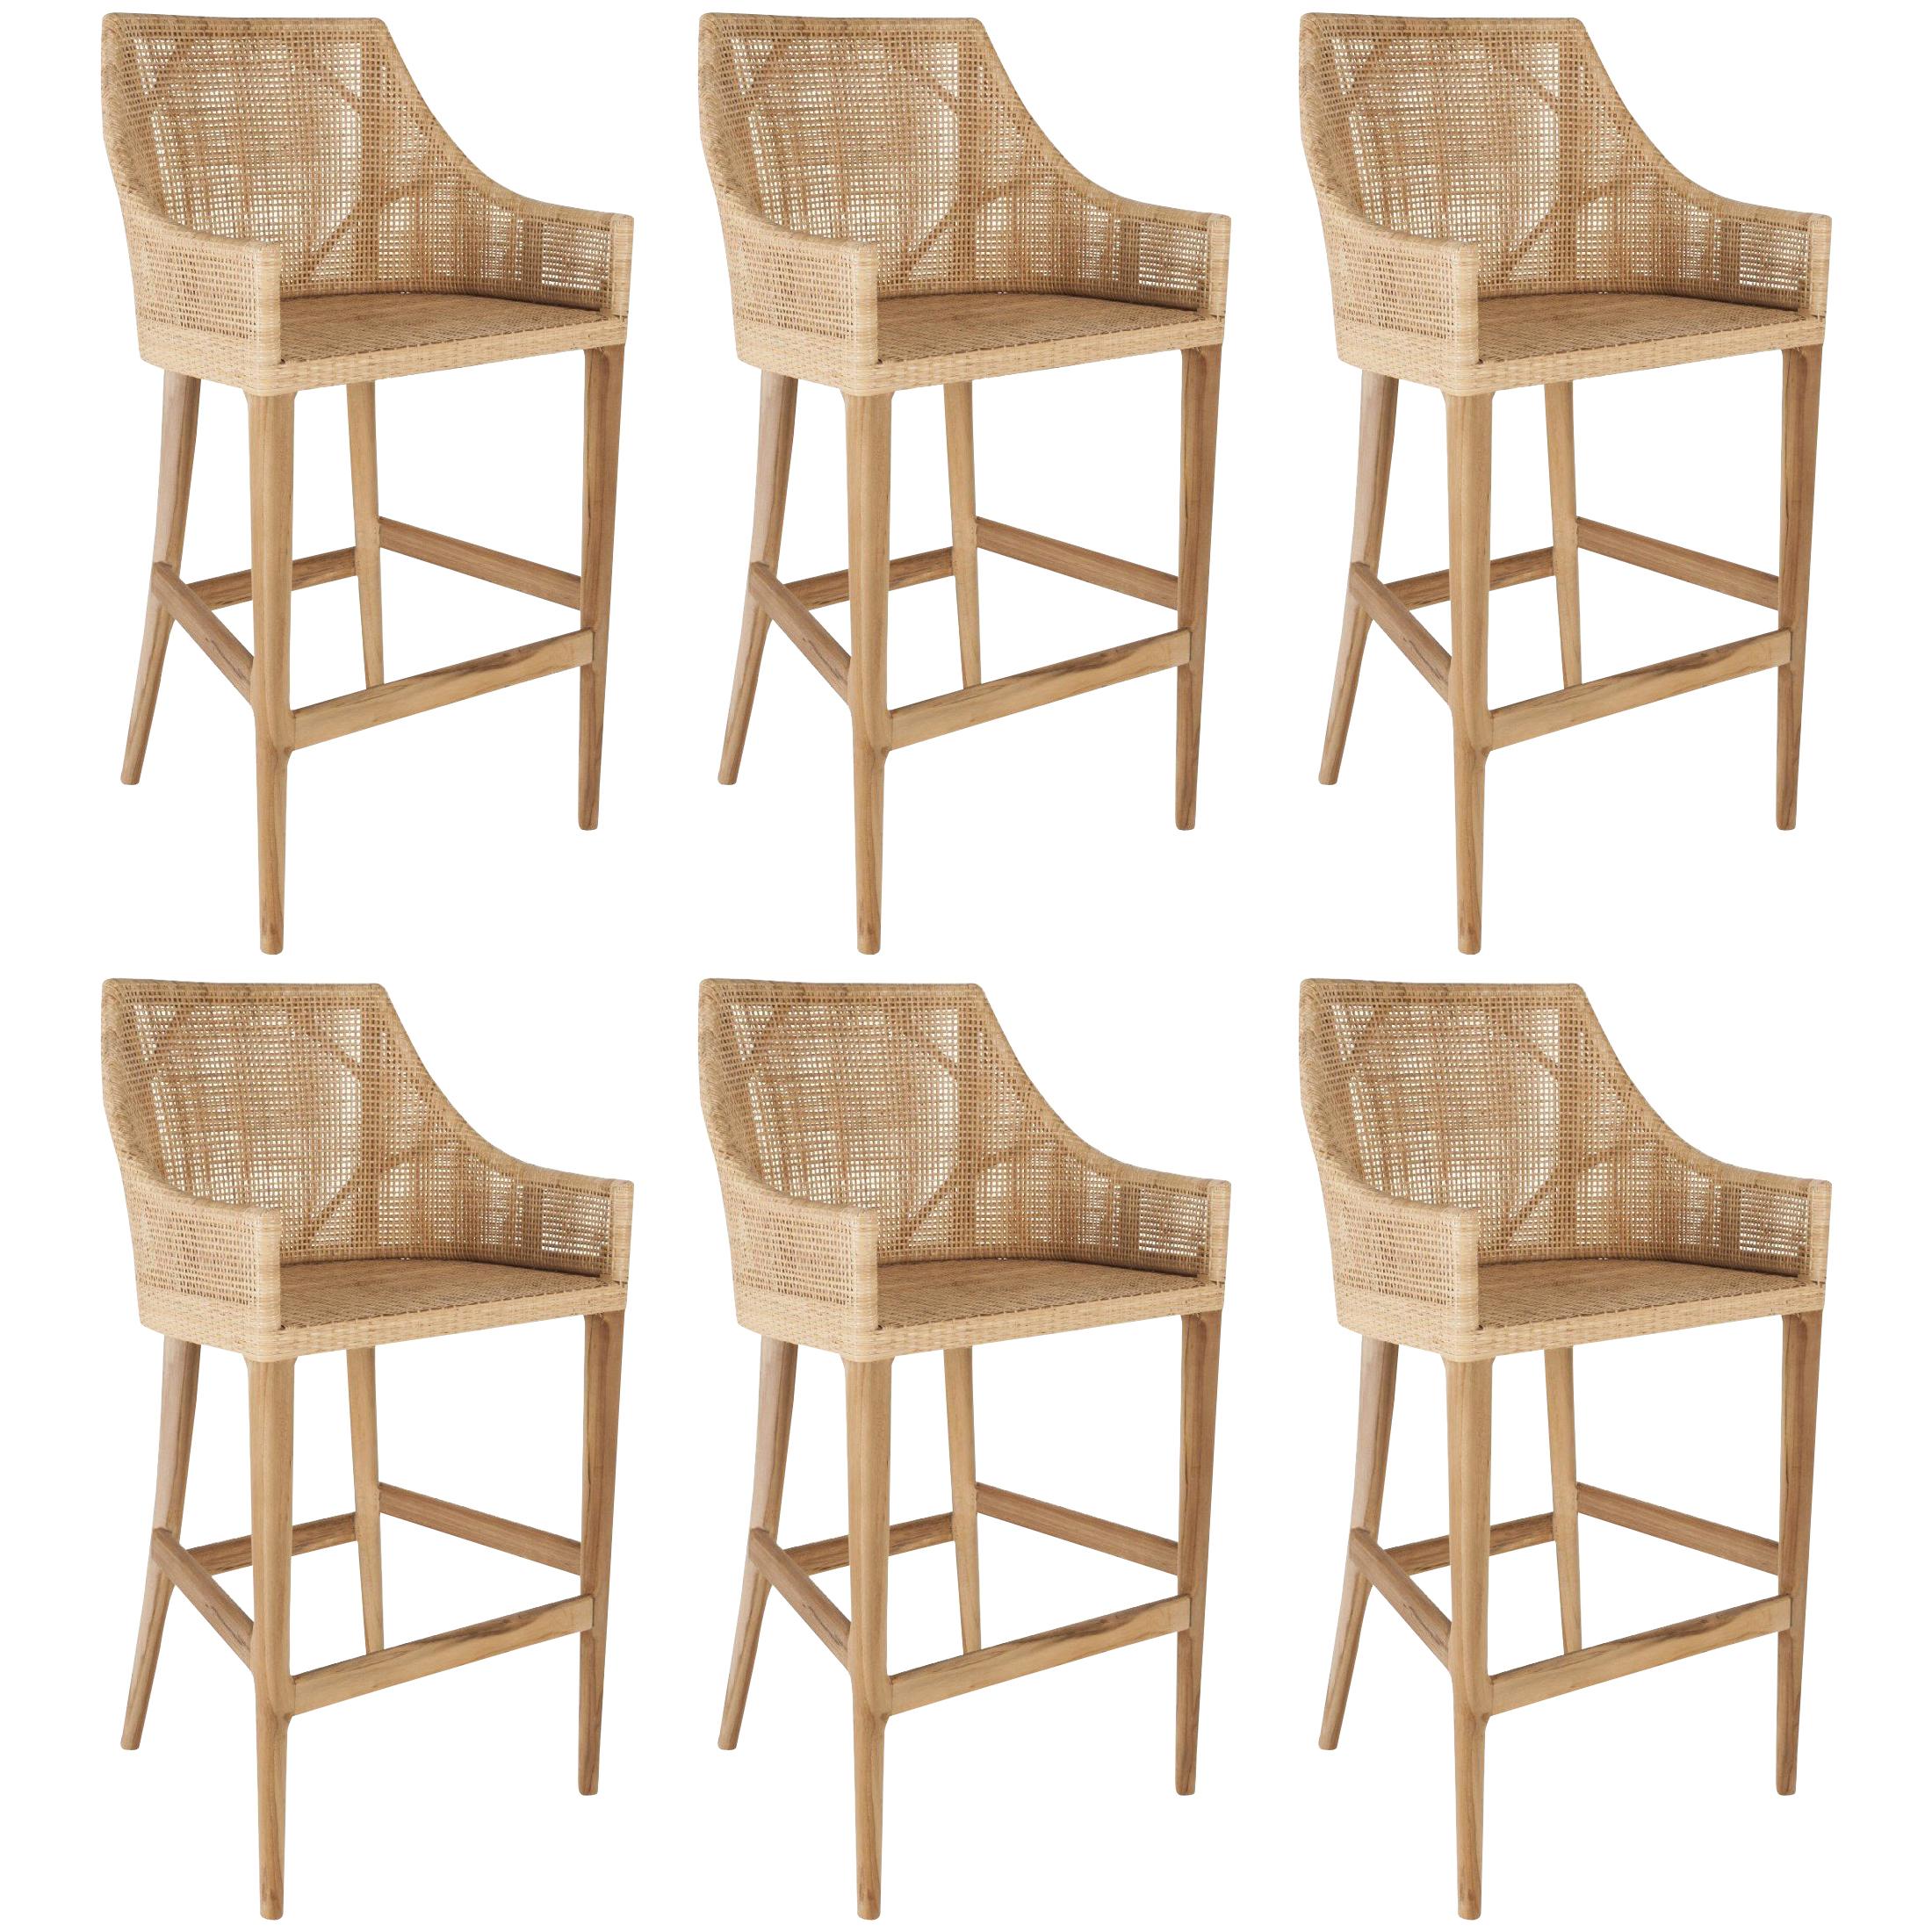 Rattan and Wooden Set of Six High Bar Stools